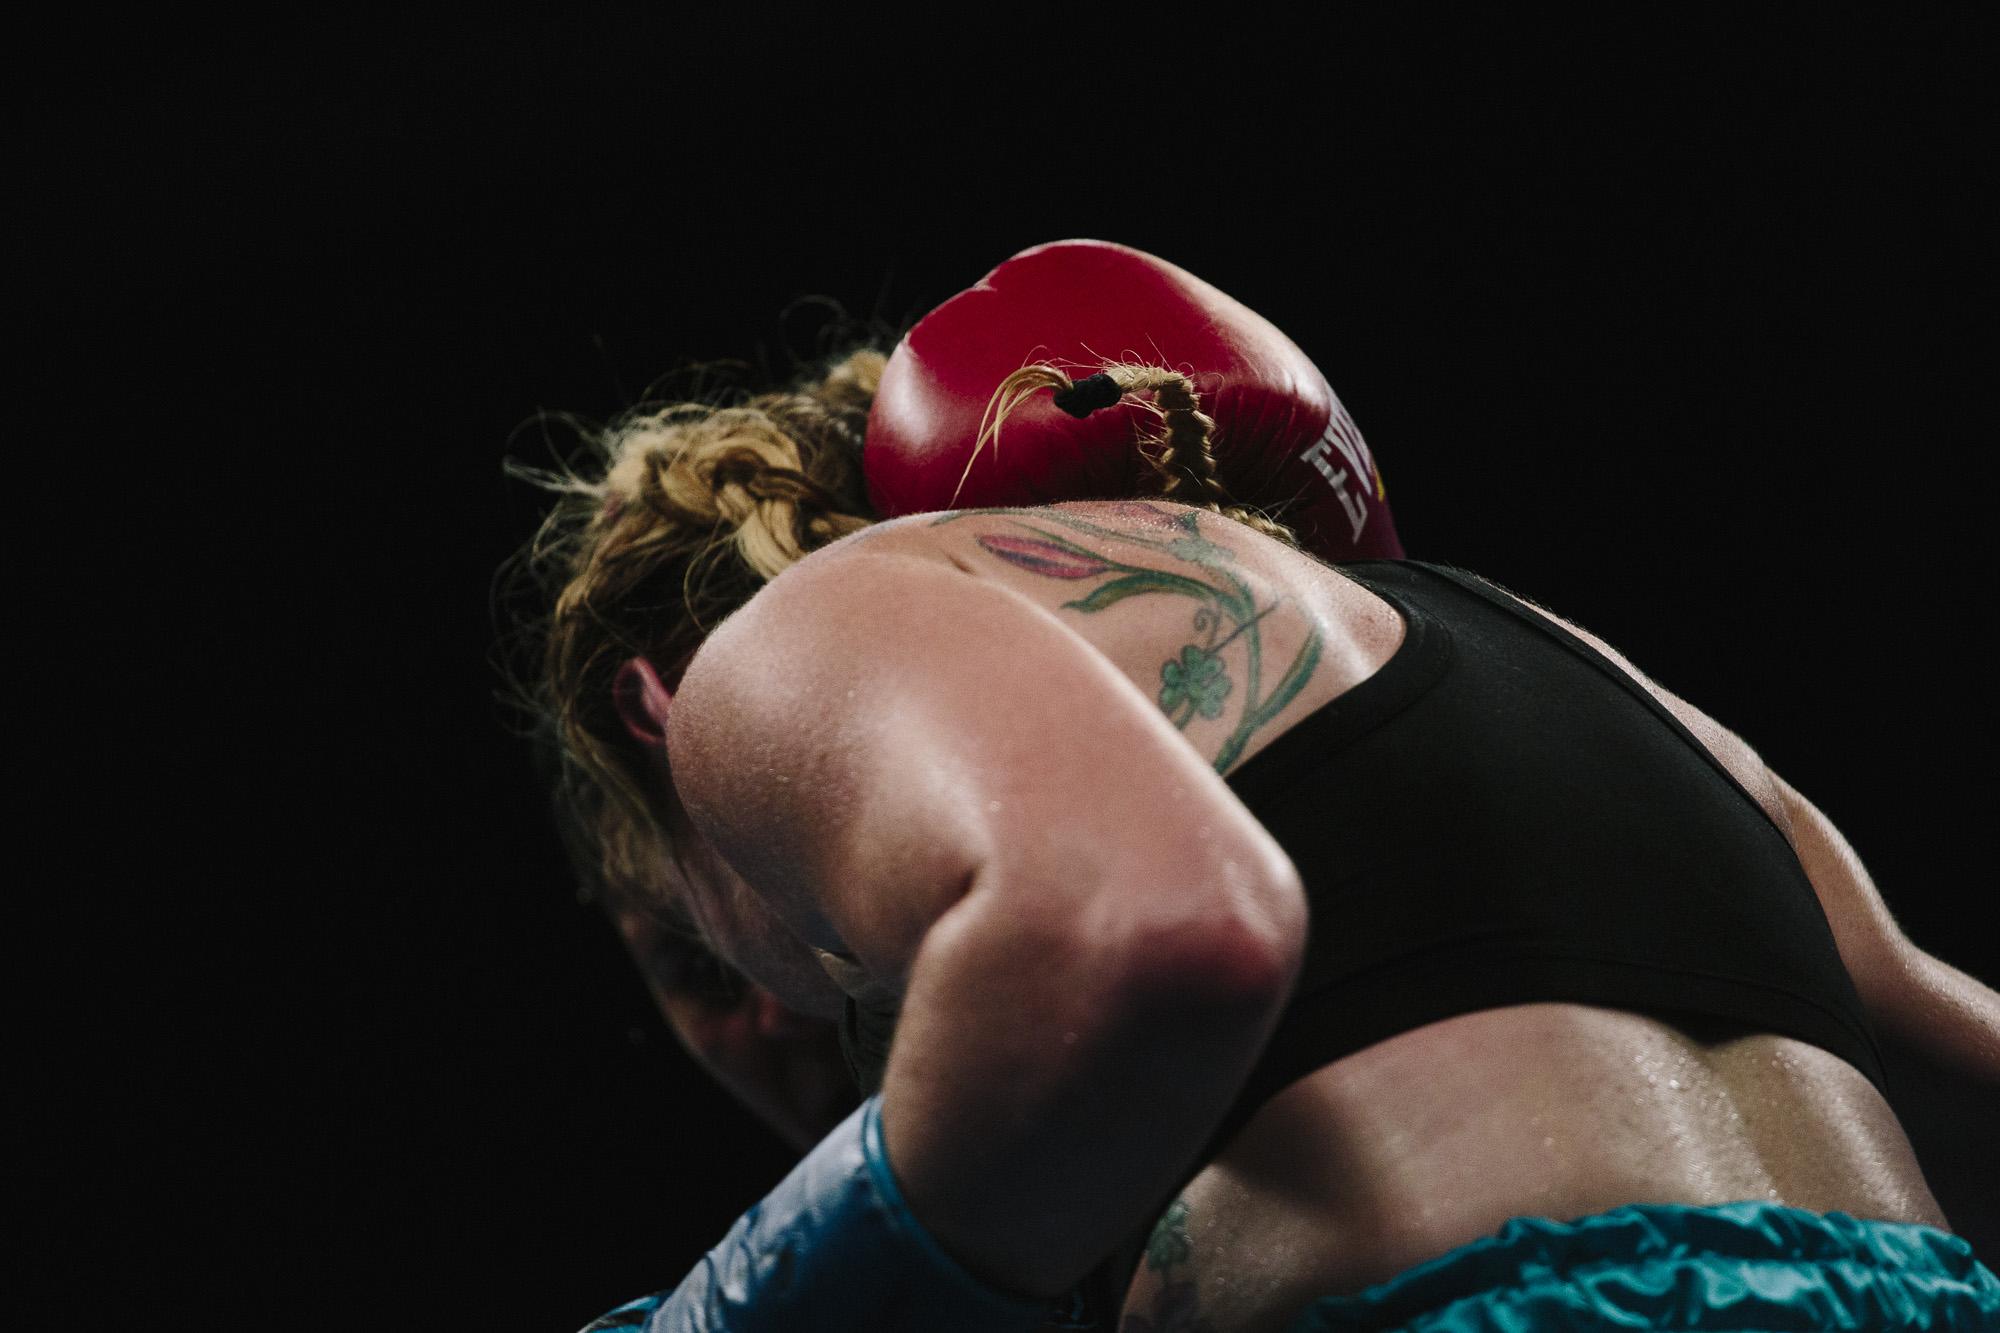 Pound for Pound | ESPN W - Featherweight boxers Heather Hardy and Shelly Vincent...